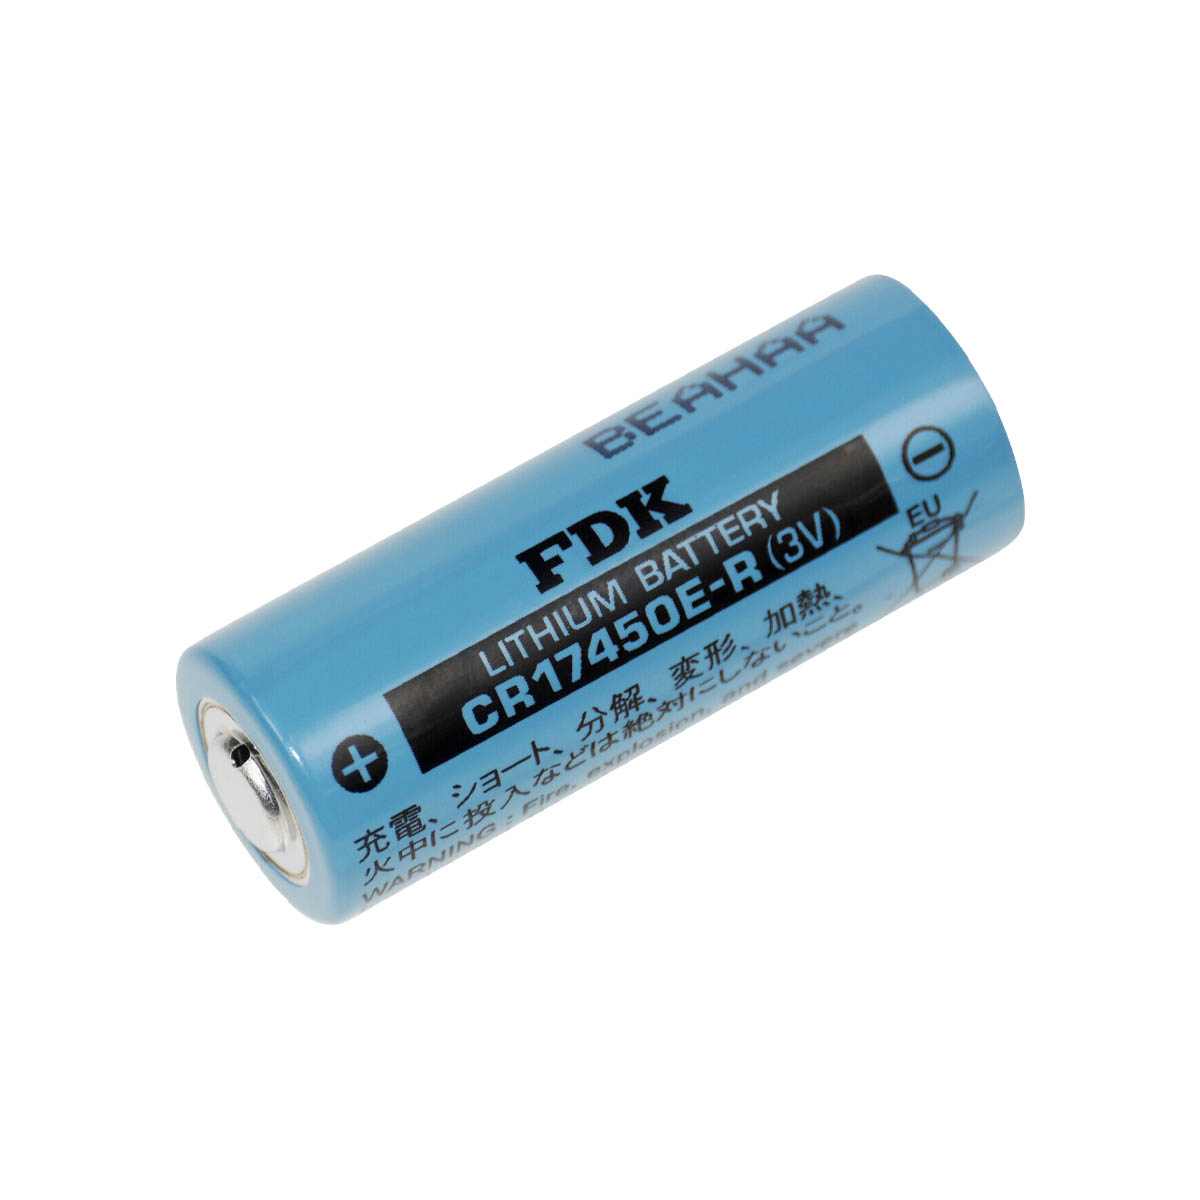 New In stock for sale, SANYO Battery CR 17450ER